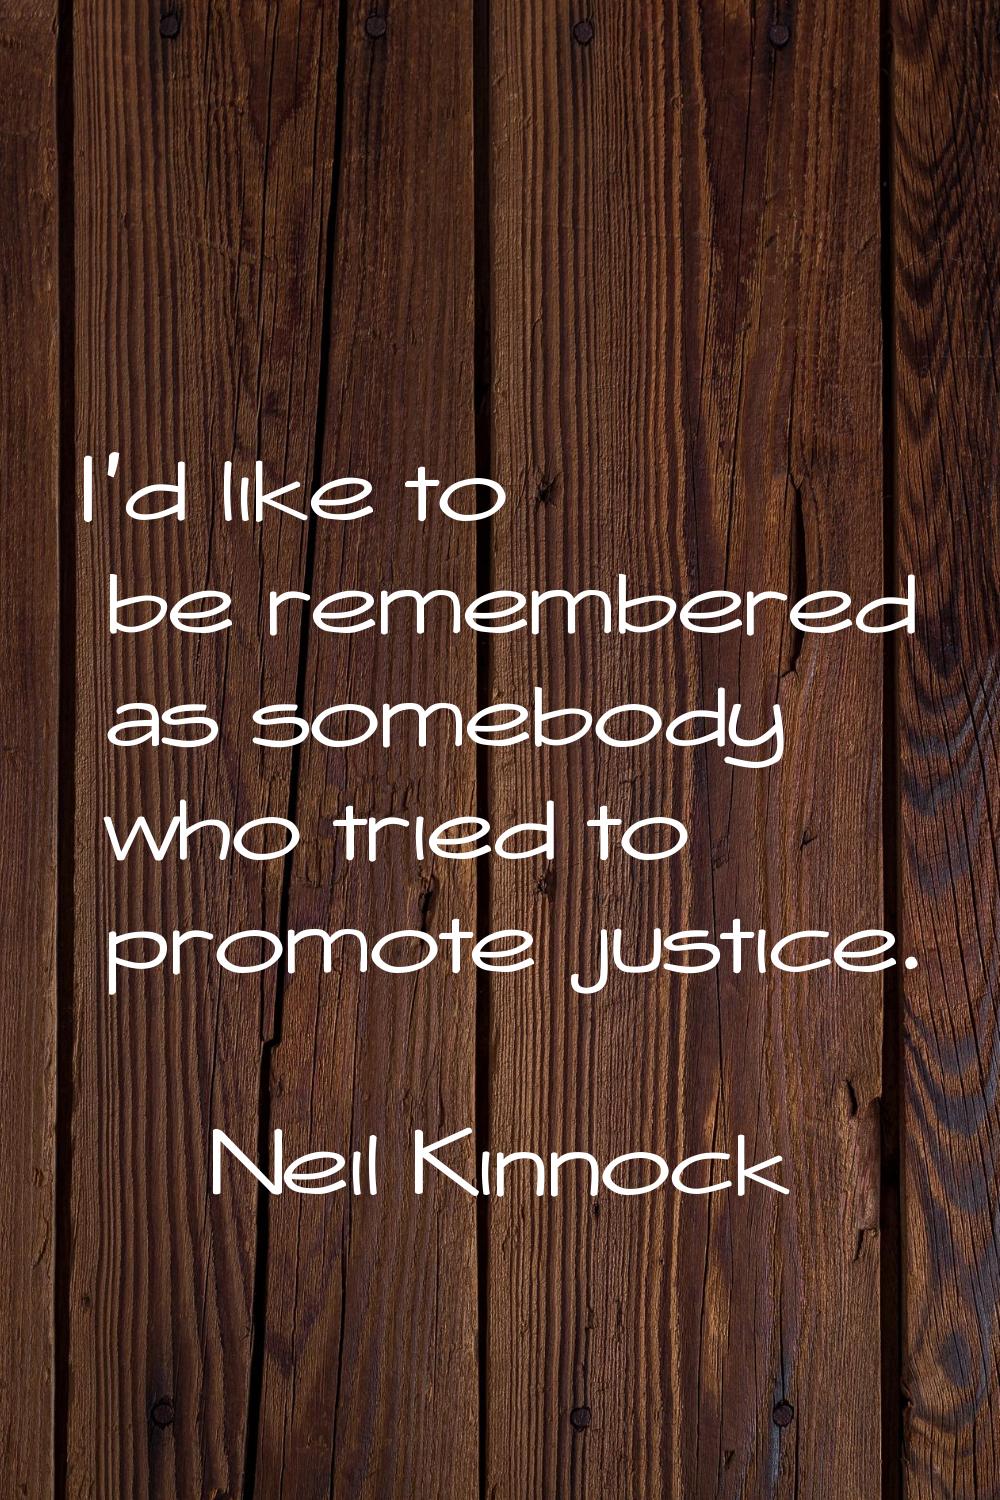 I'd like to be remembered as somebody who tried to promote justice.